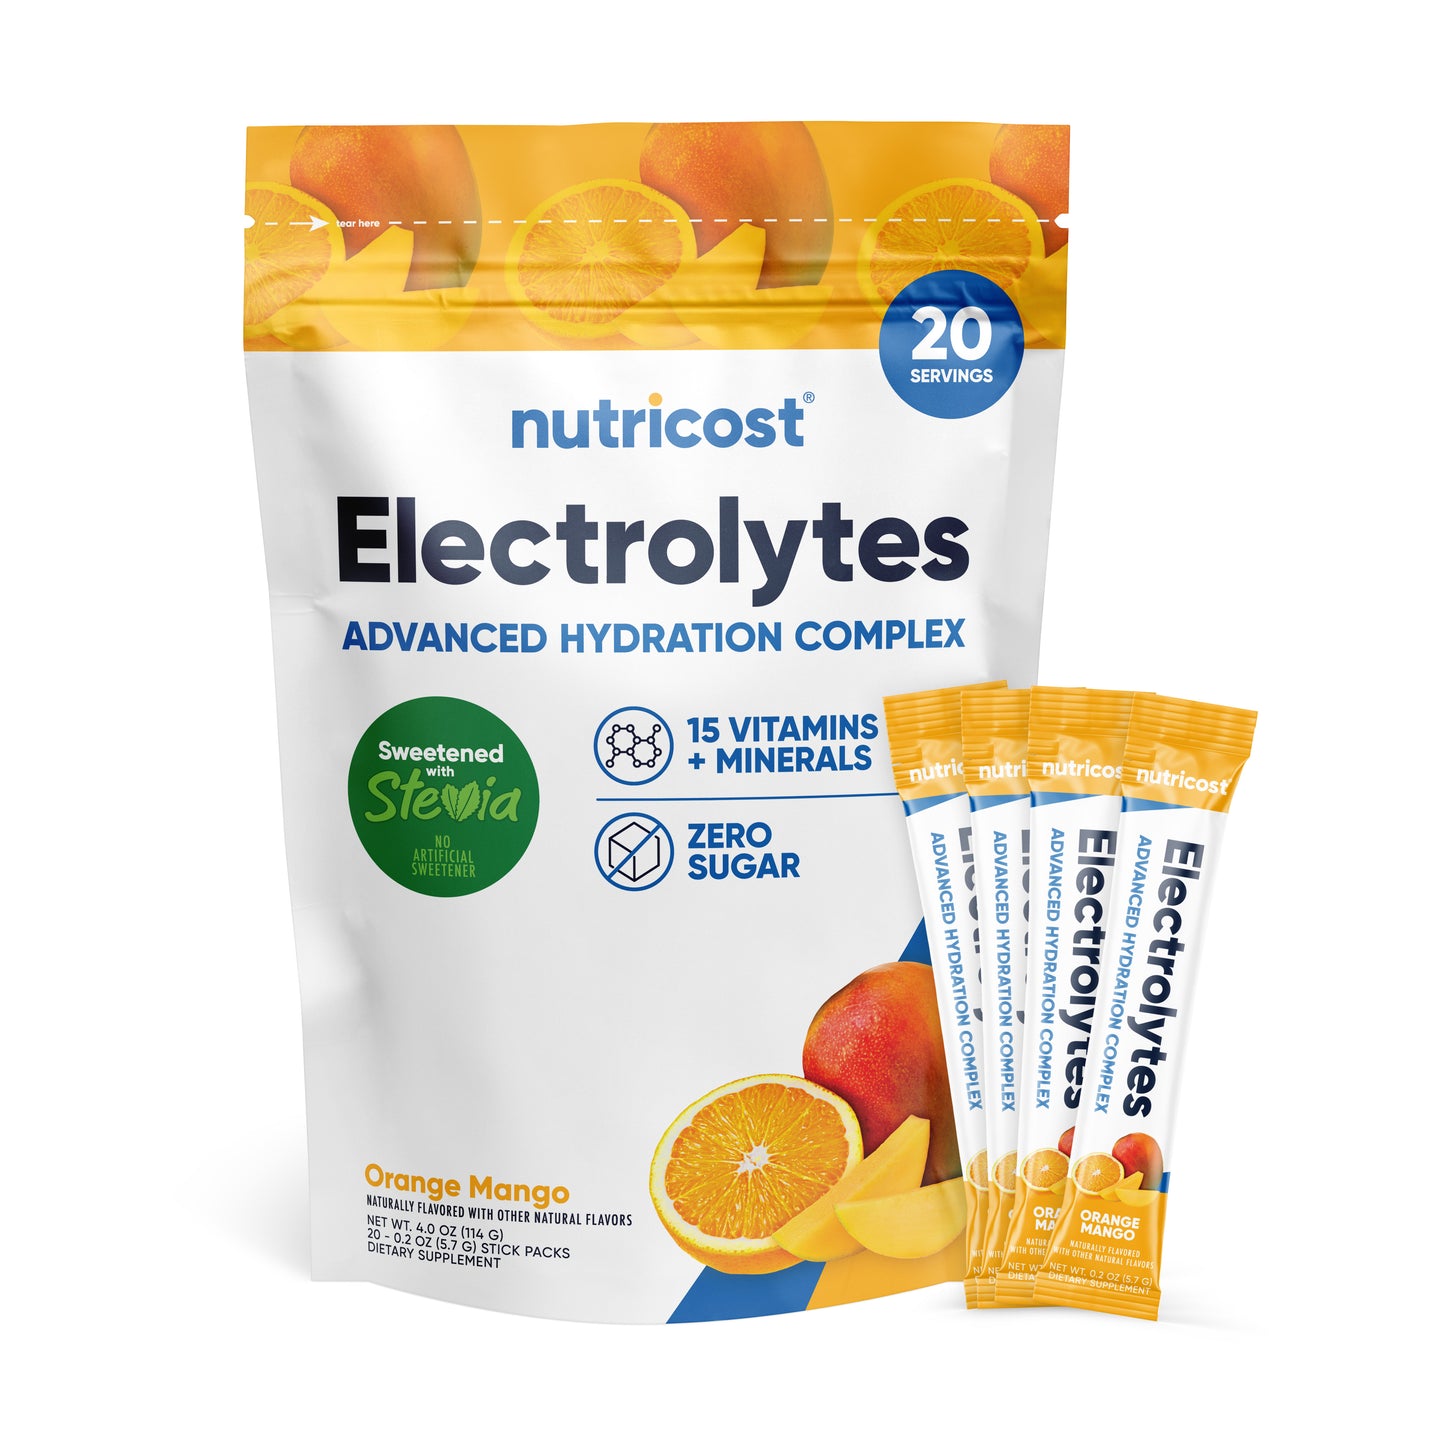 Nutricost Electrolytes Powder Hydration Packets